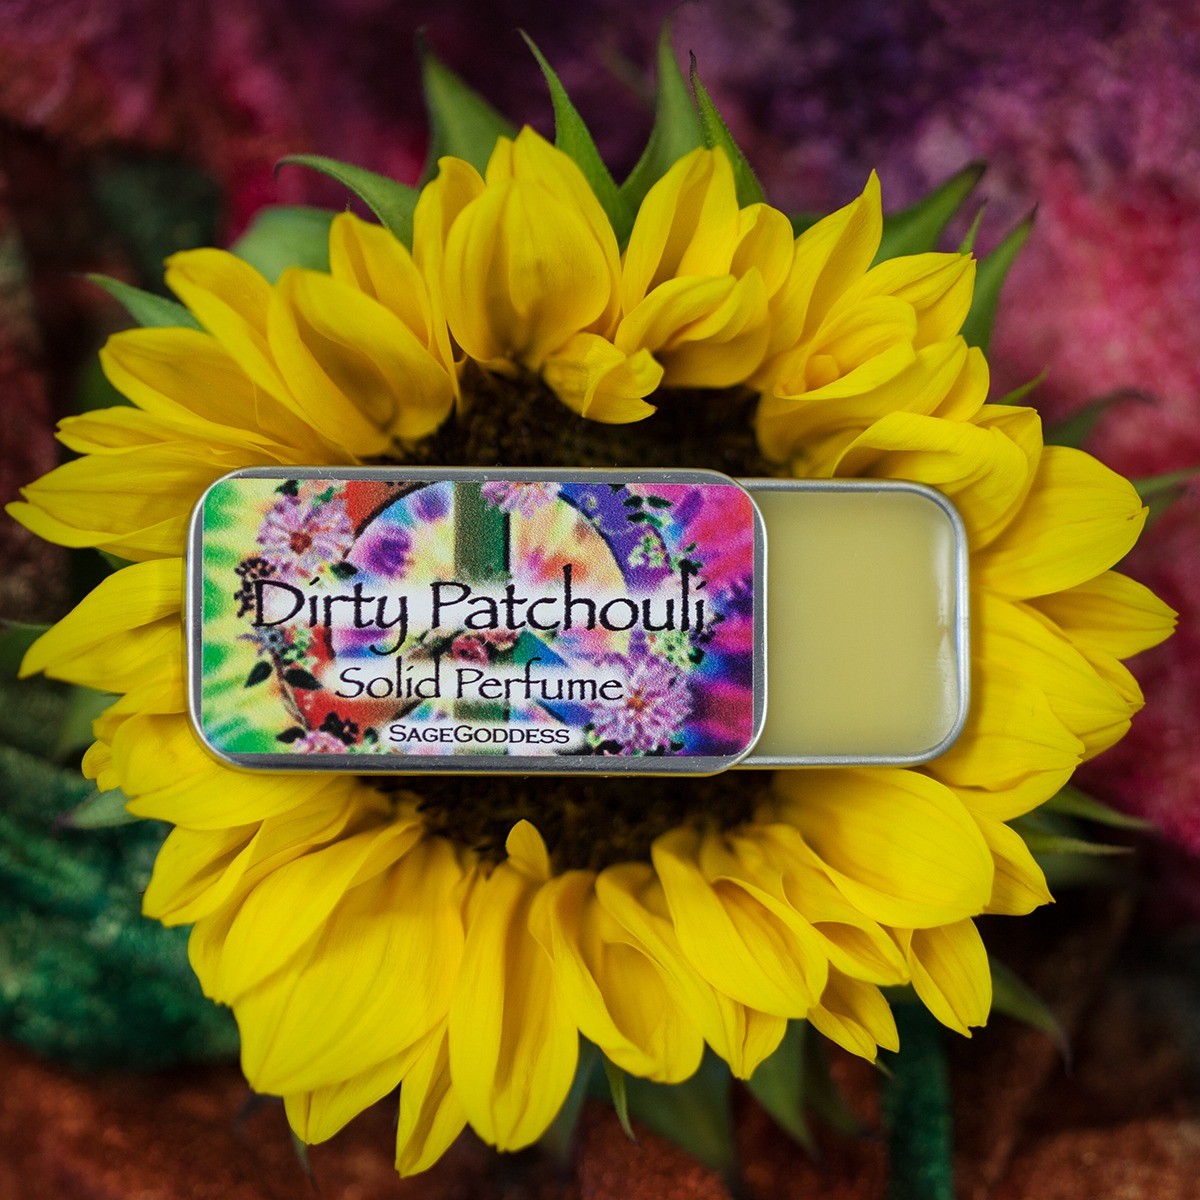 Dirty Patchouli Solid Perfume 2_19